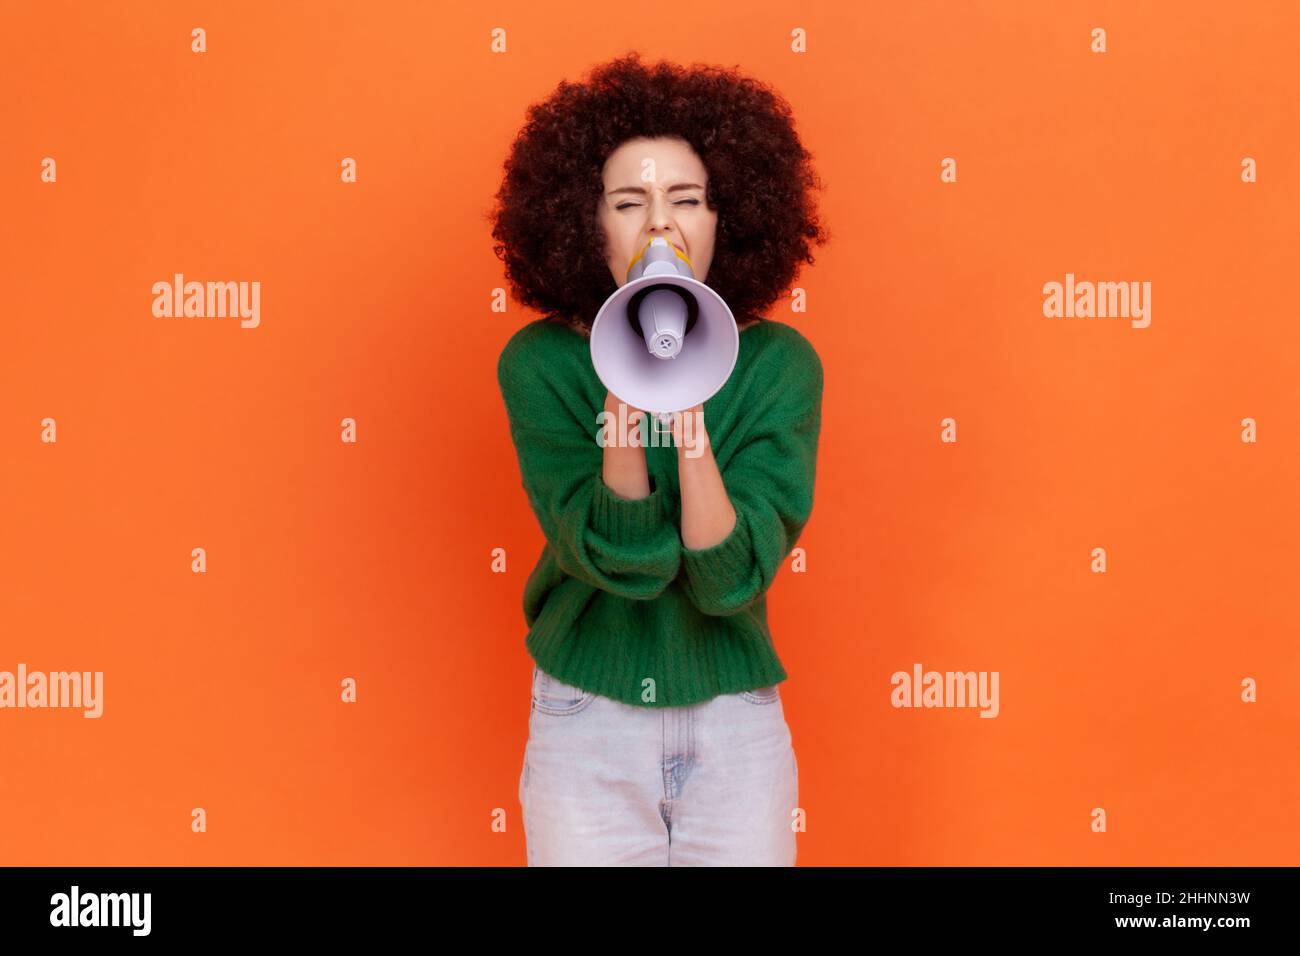 Attractive woman with Afro hairstyle wearing green casual style sweater screaming loud using megaphone, making announcement. presentation. Indoor studio shot isolated on orange background. Stock Photo